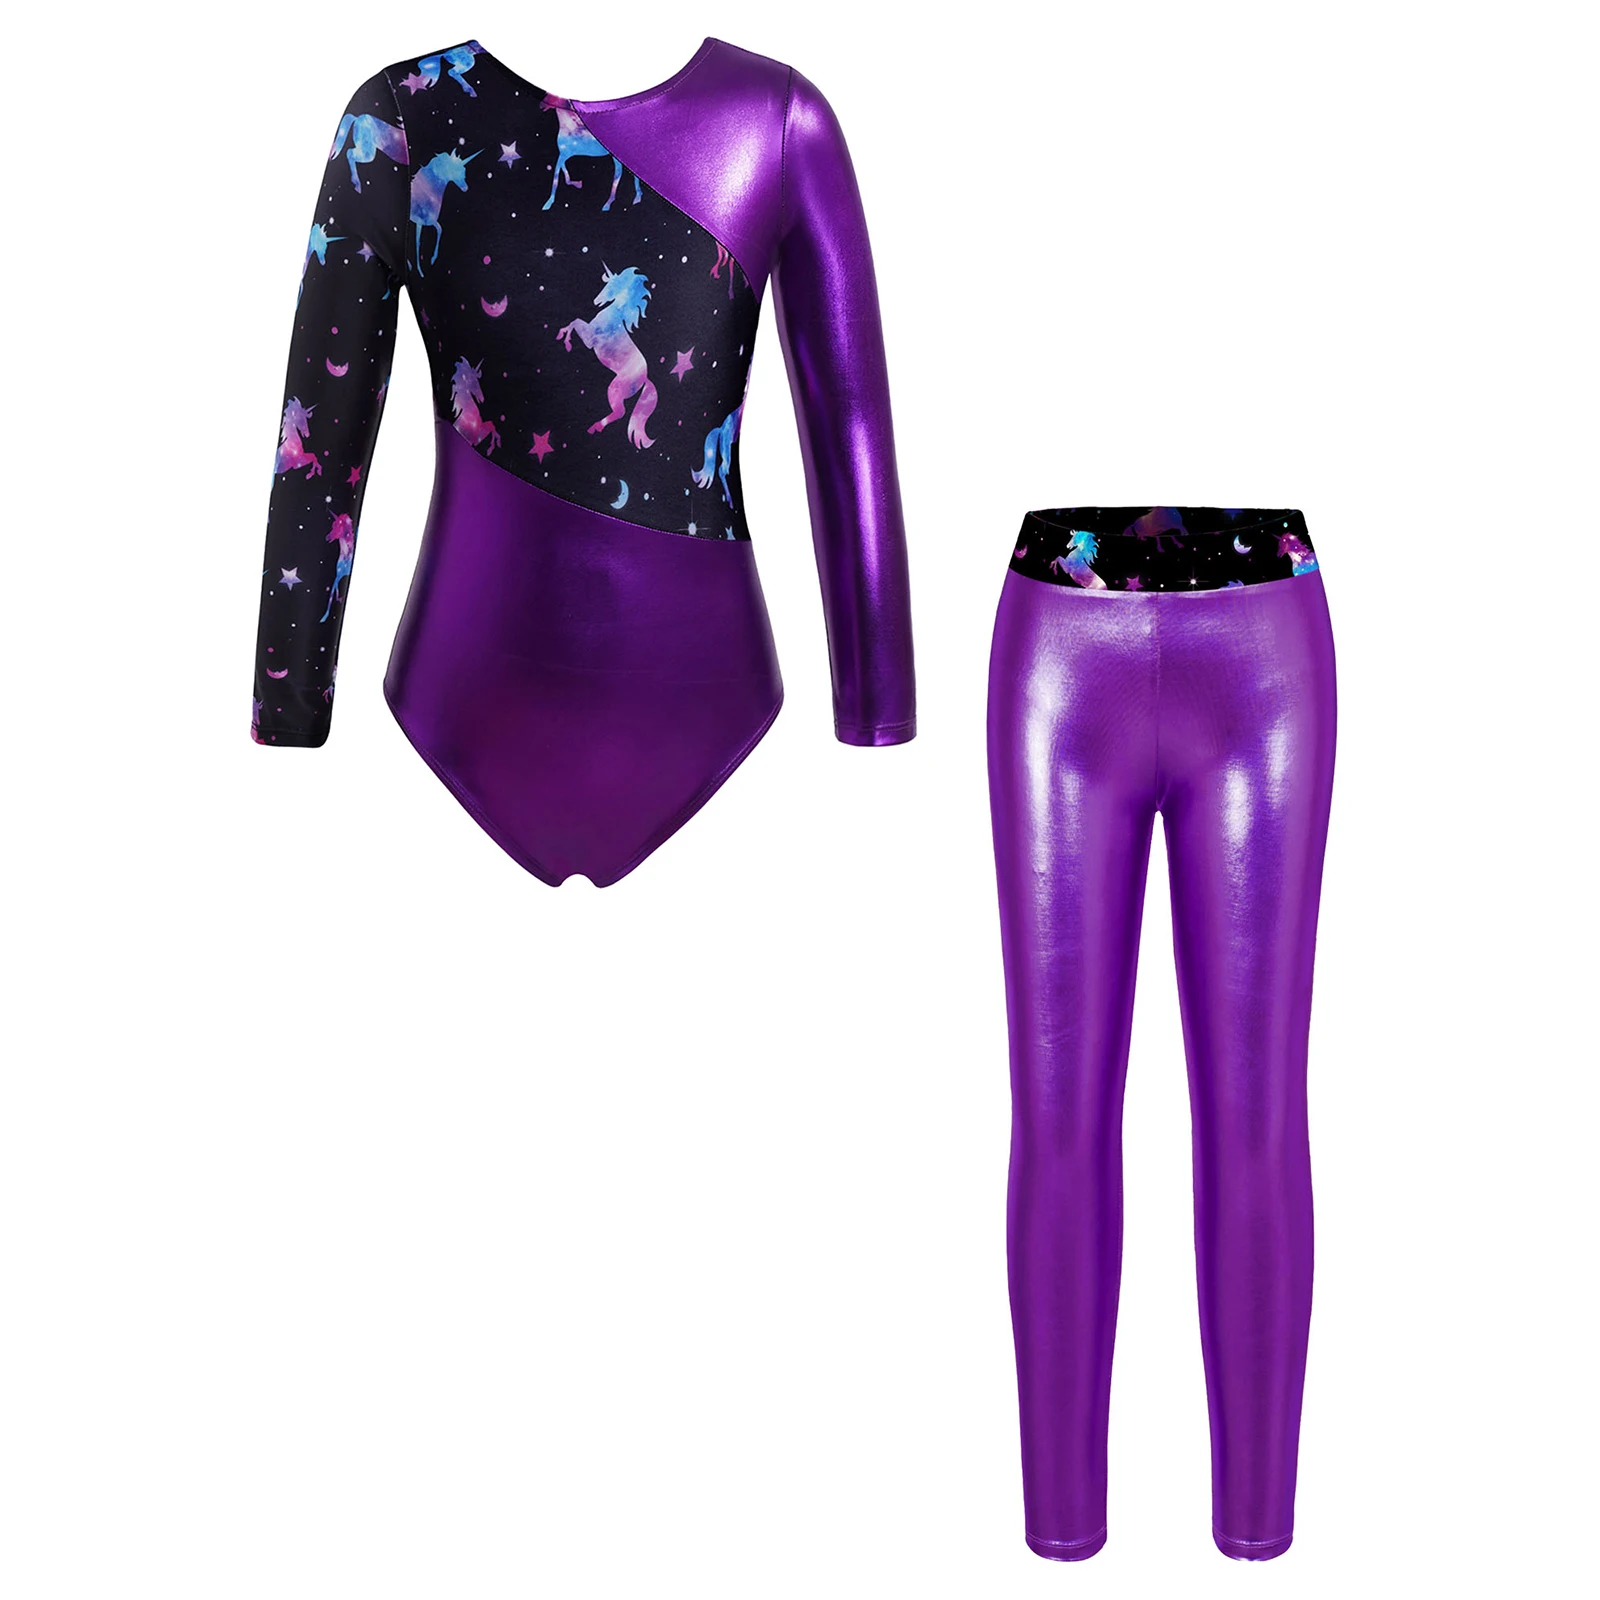 Kids Girls Gymnastics Leotards Long Sleeve Ballet Dancewear Colorful Print Athletic Yoga Workout Skating Outfit with Leggings